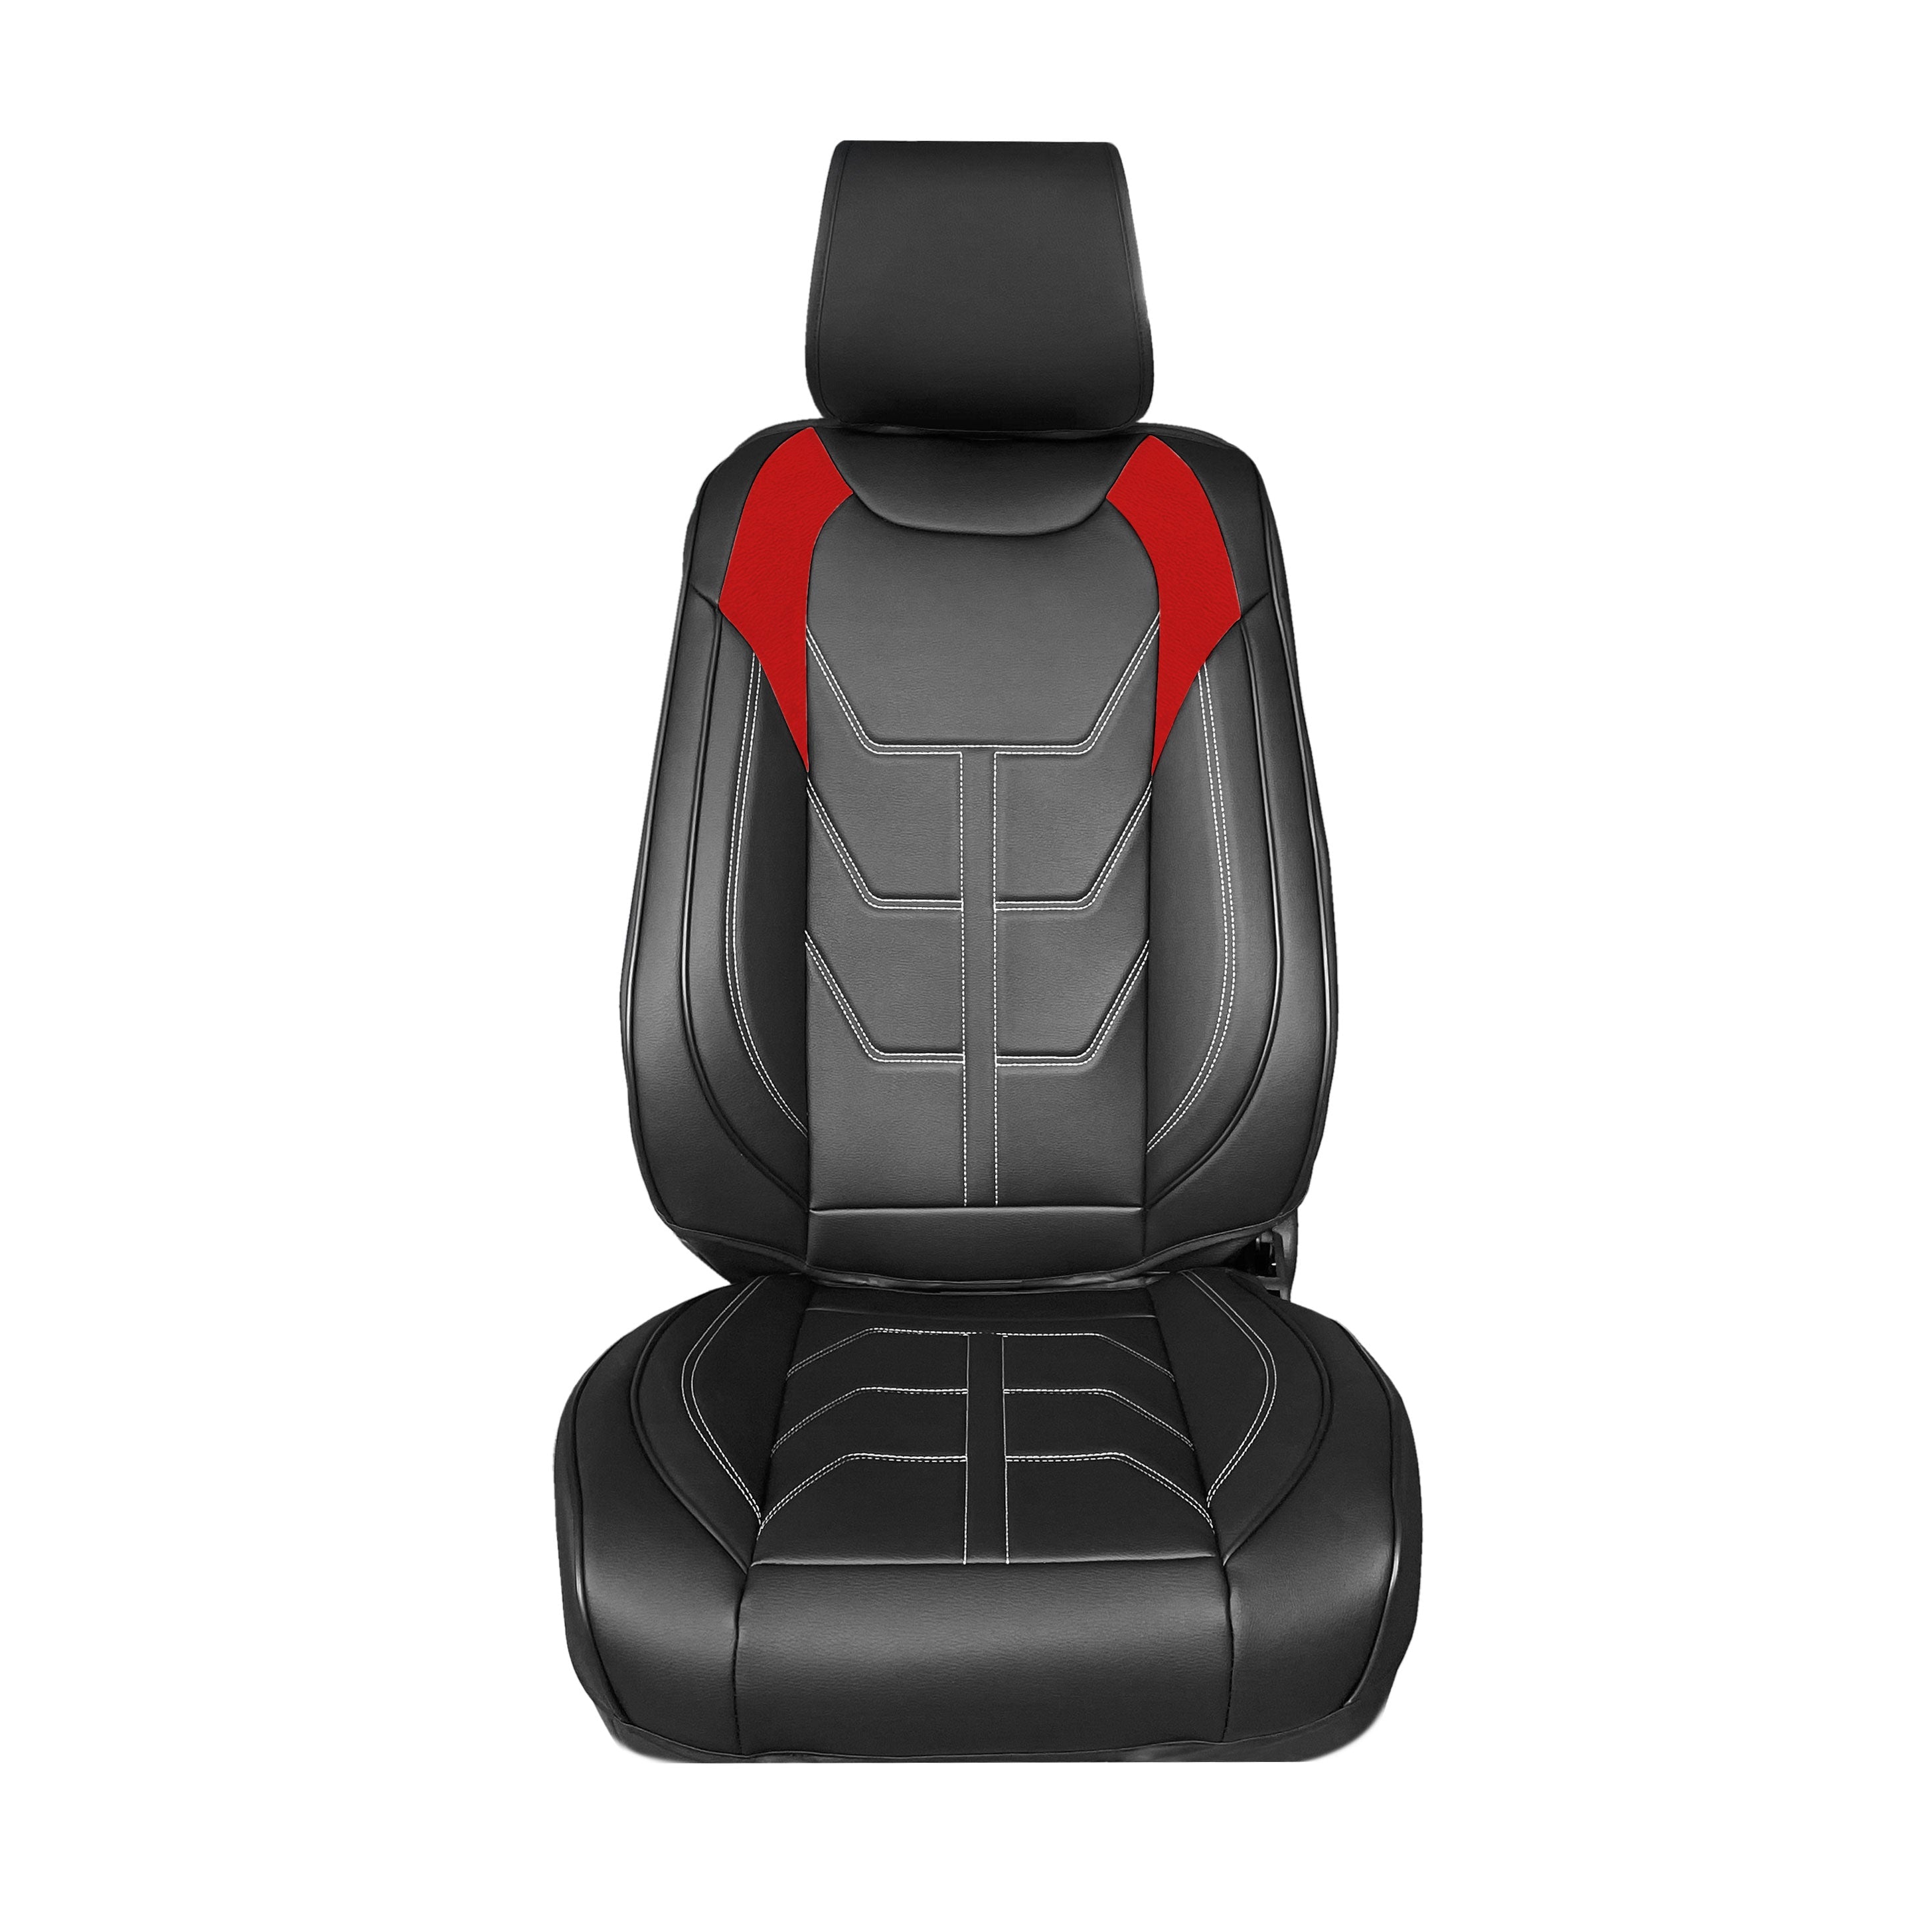 Bionic70 Deluxe Faux Leather Car Seat Covers with Contrast Stitching - Front Set Red